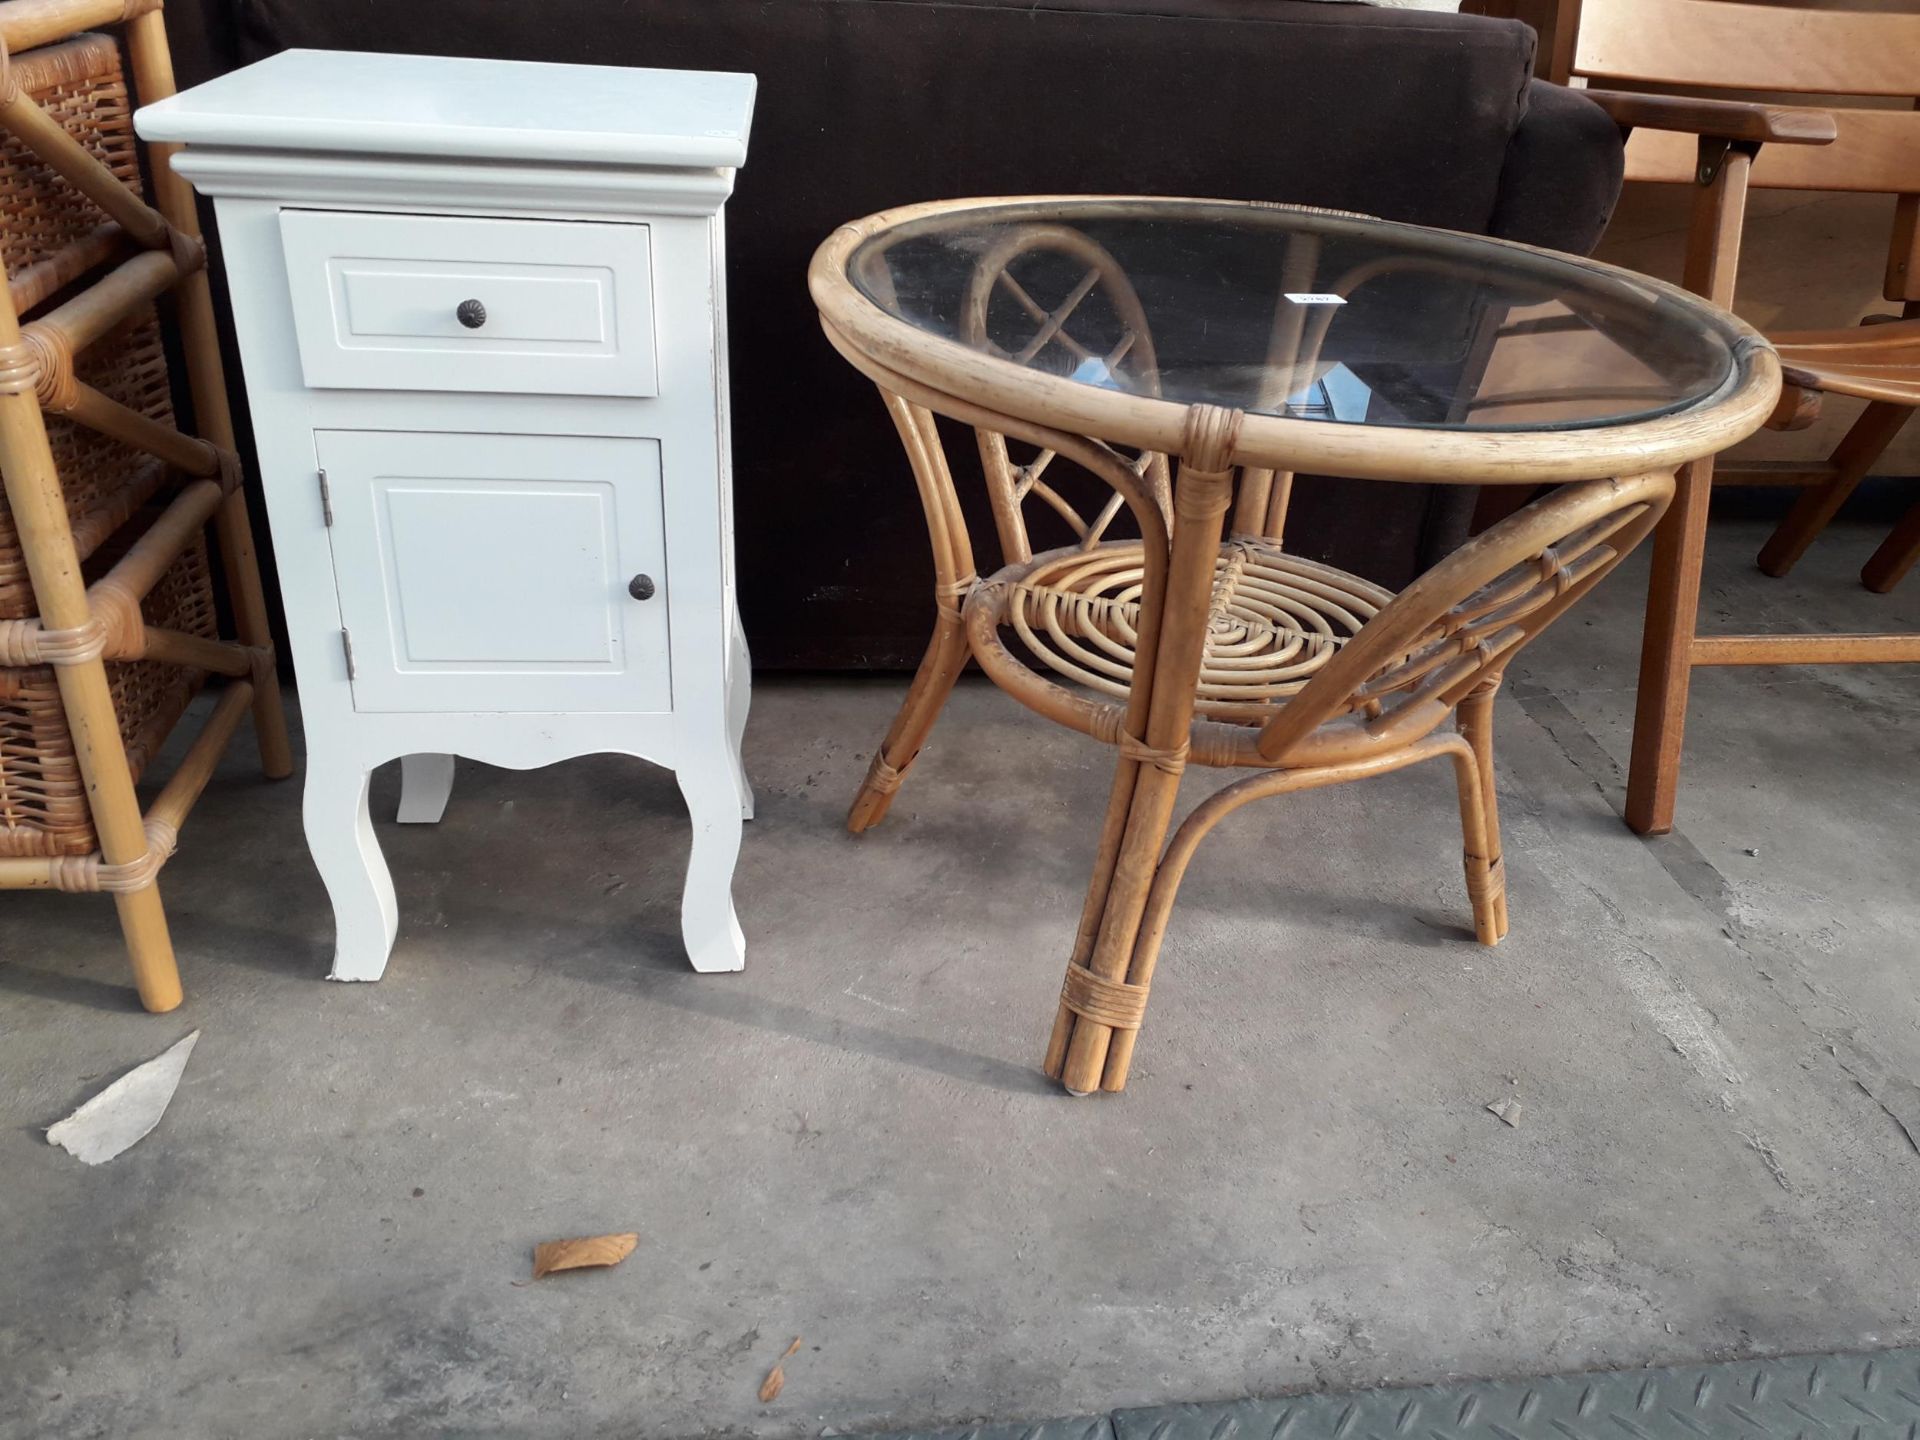 A 26" DIAMETER BAMBOO TABLE WITH GLASS TOP AND WHITE PAINTED BEDSIDE LOCKER - Image 2 of 2